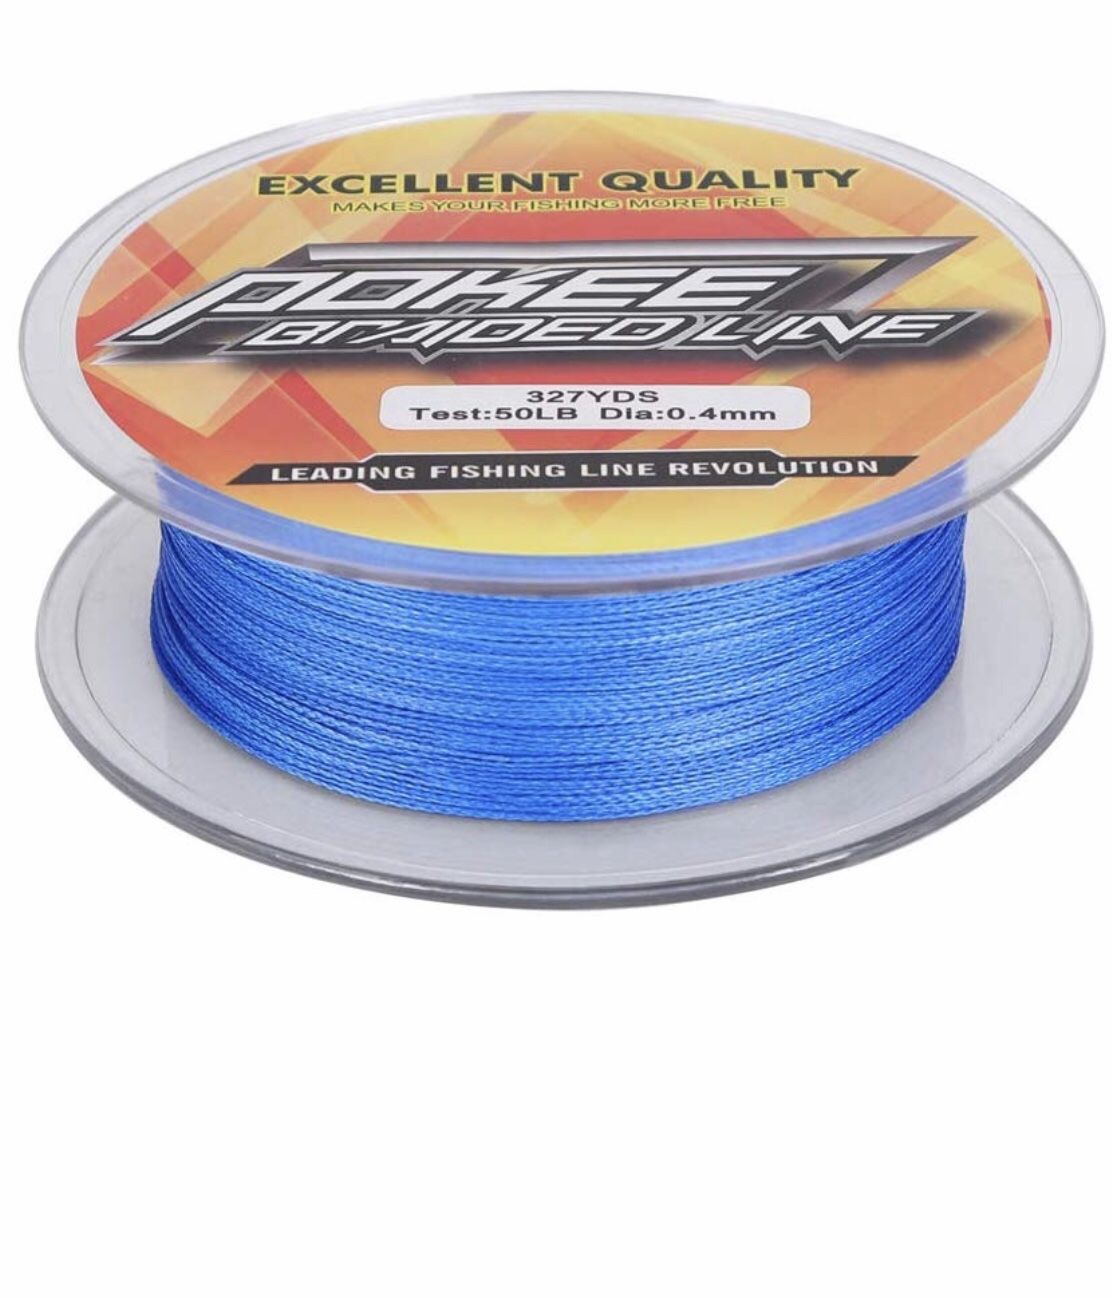 POKEE abrasions resistance fishing line.